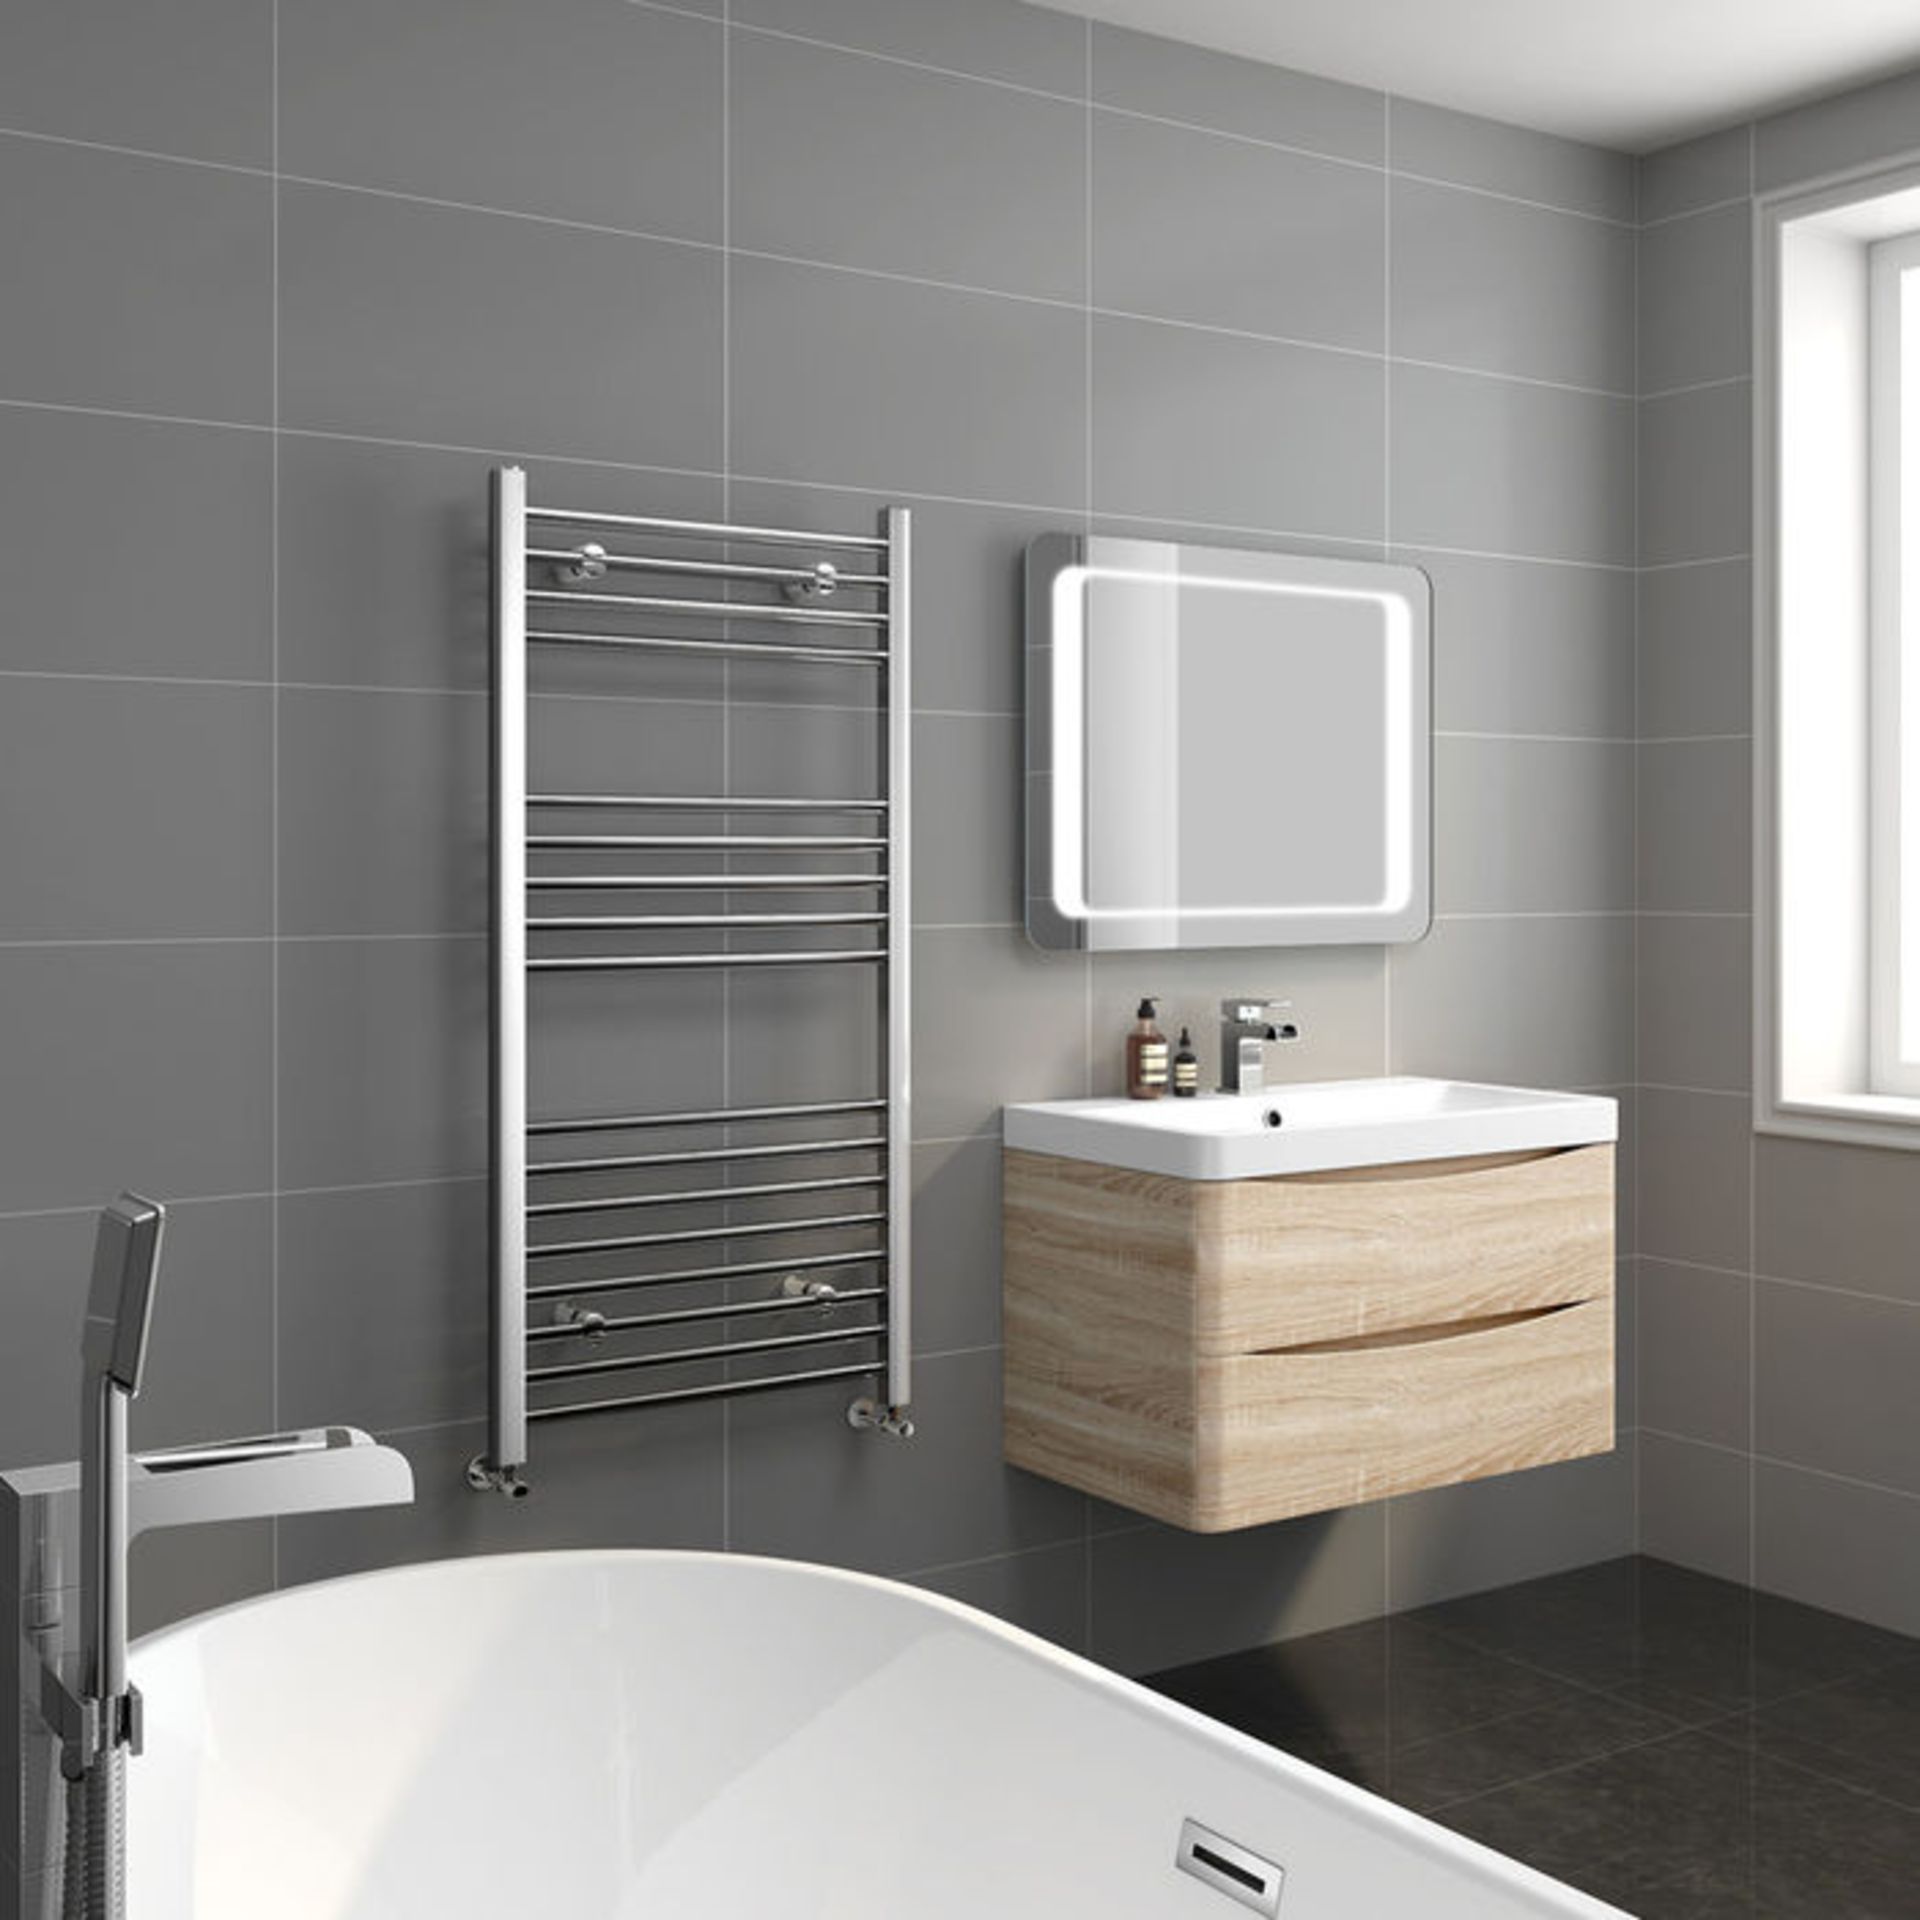 (JM46) 1200x600mm - 20mm Tubes - Chrome Heated Straight Rail Ladder Towel Radiator. Made from chrome - Image 2 of 3